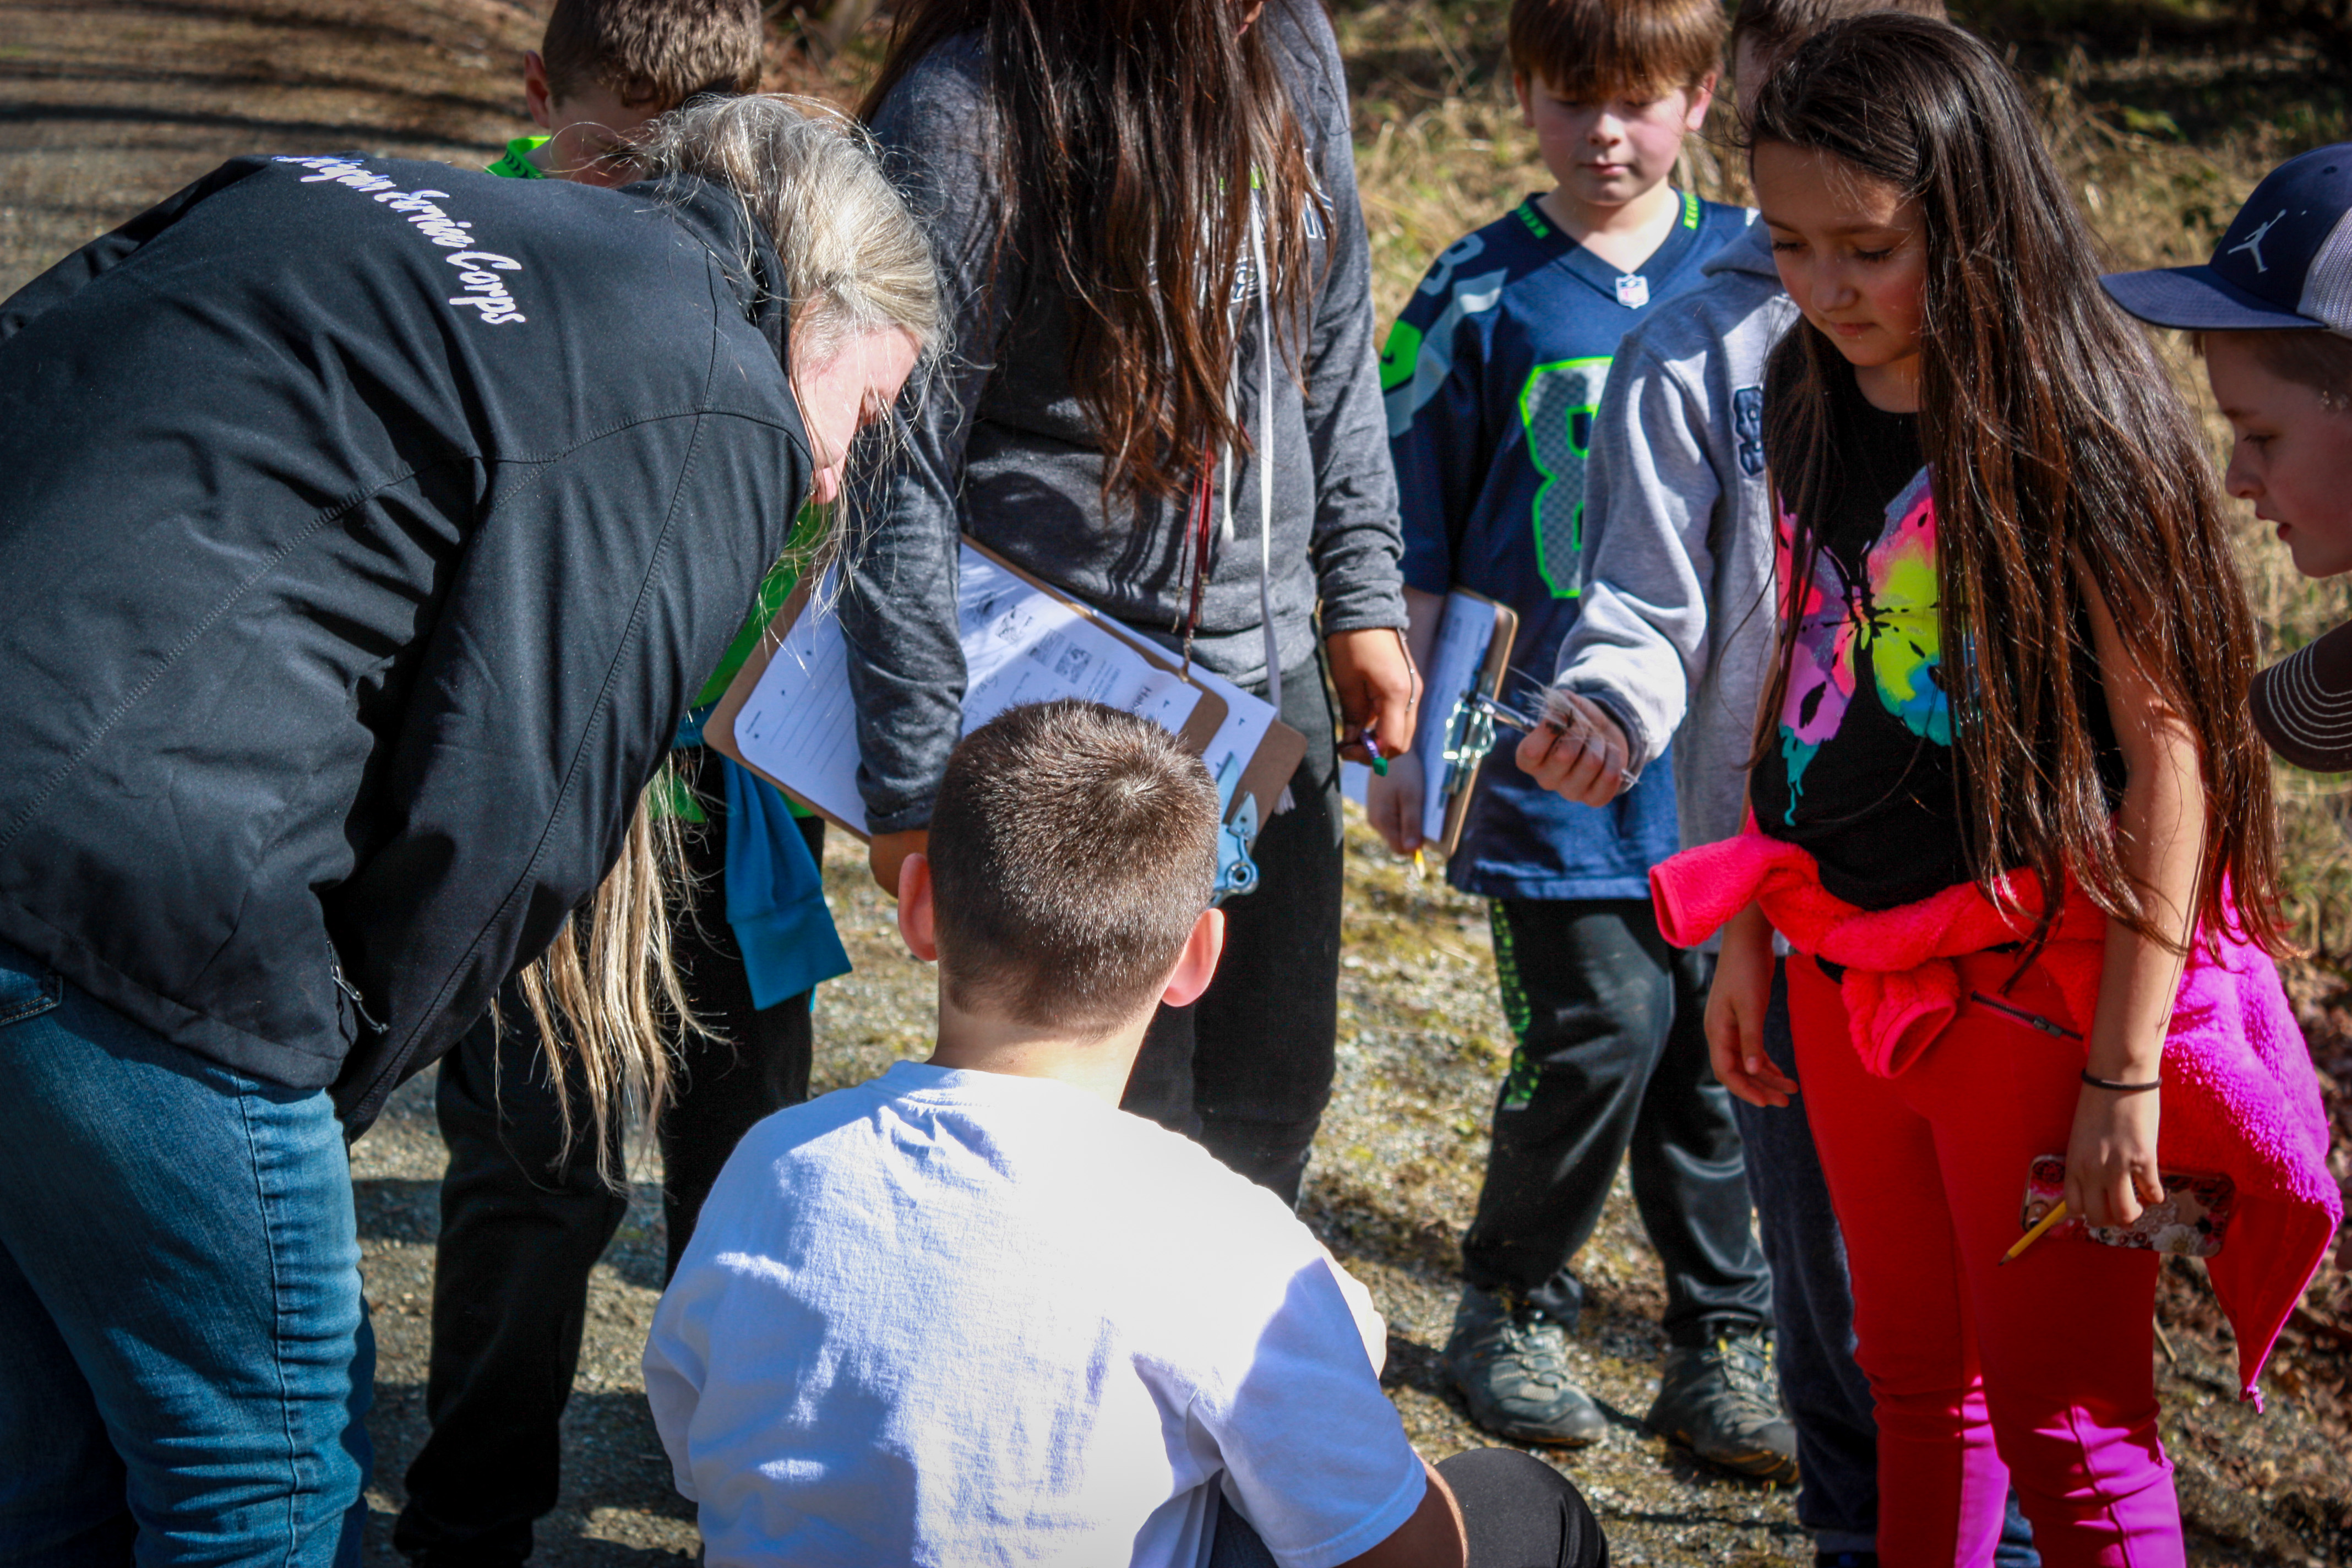 Fifth grade students from Lyman Elementary school participate in field-based environmental education at Lyman Slough, March 2018. Photograph credit: Skagit Land Trust staff.